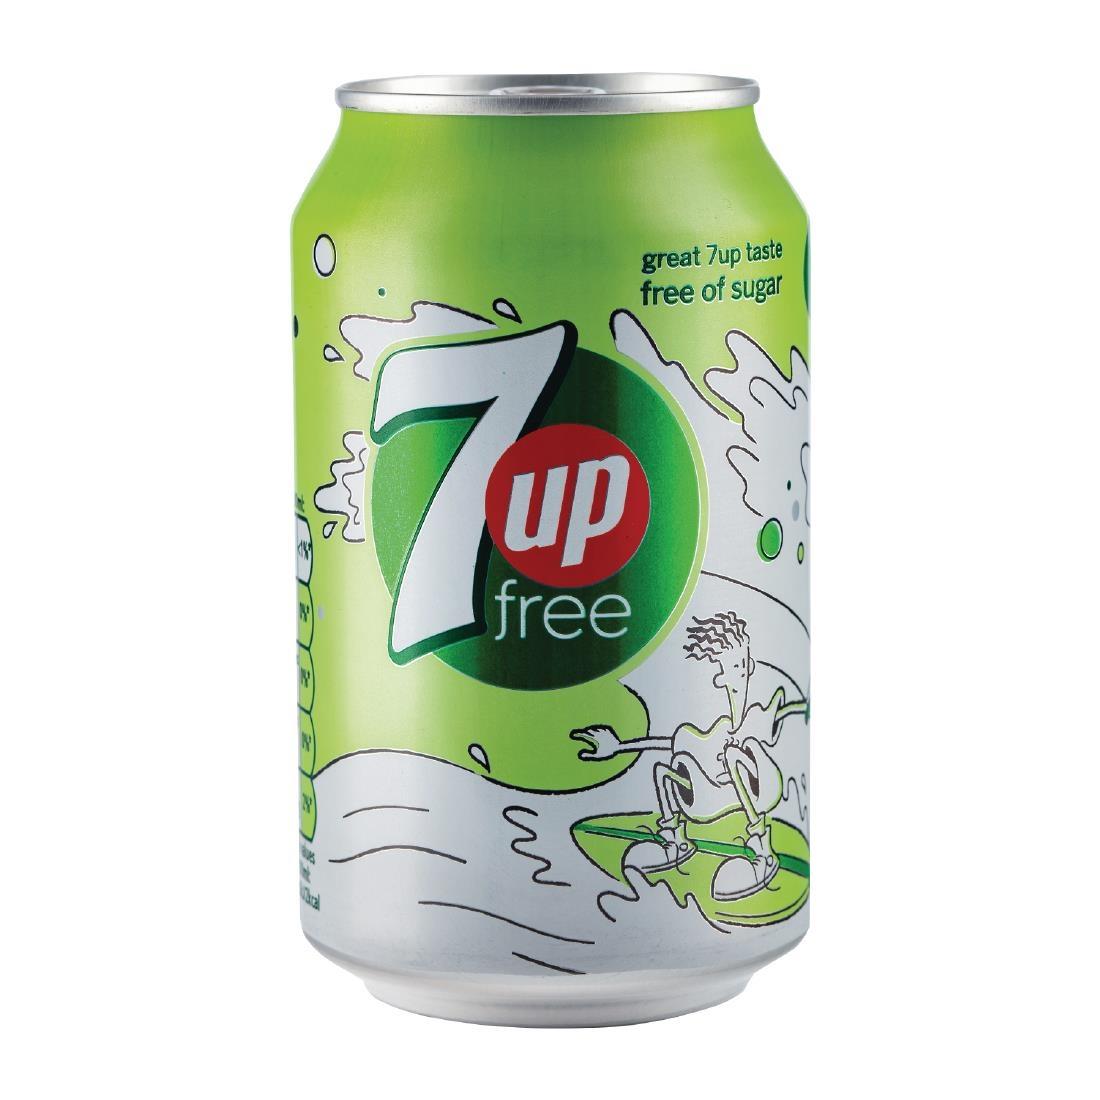 7up Sugar-free Cans 330ml (Pack of 24) - FW837  - 1